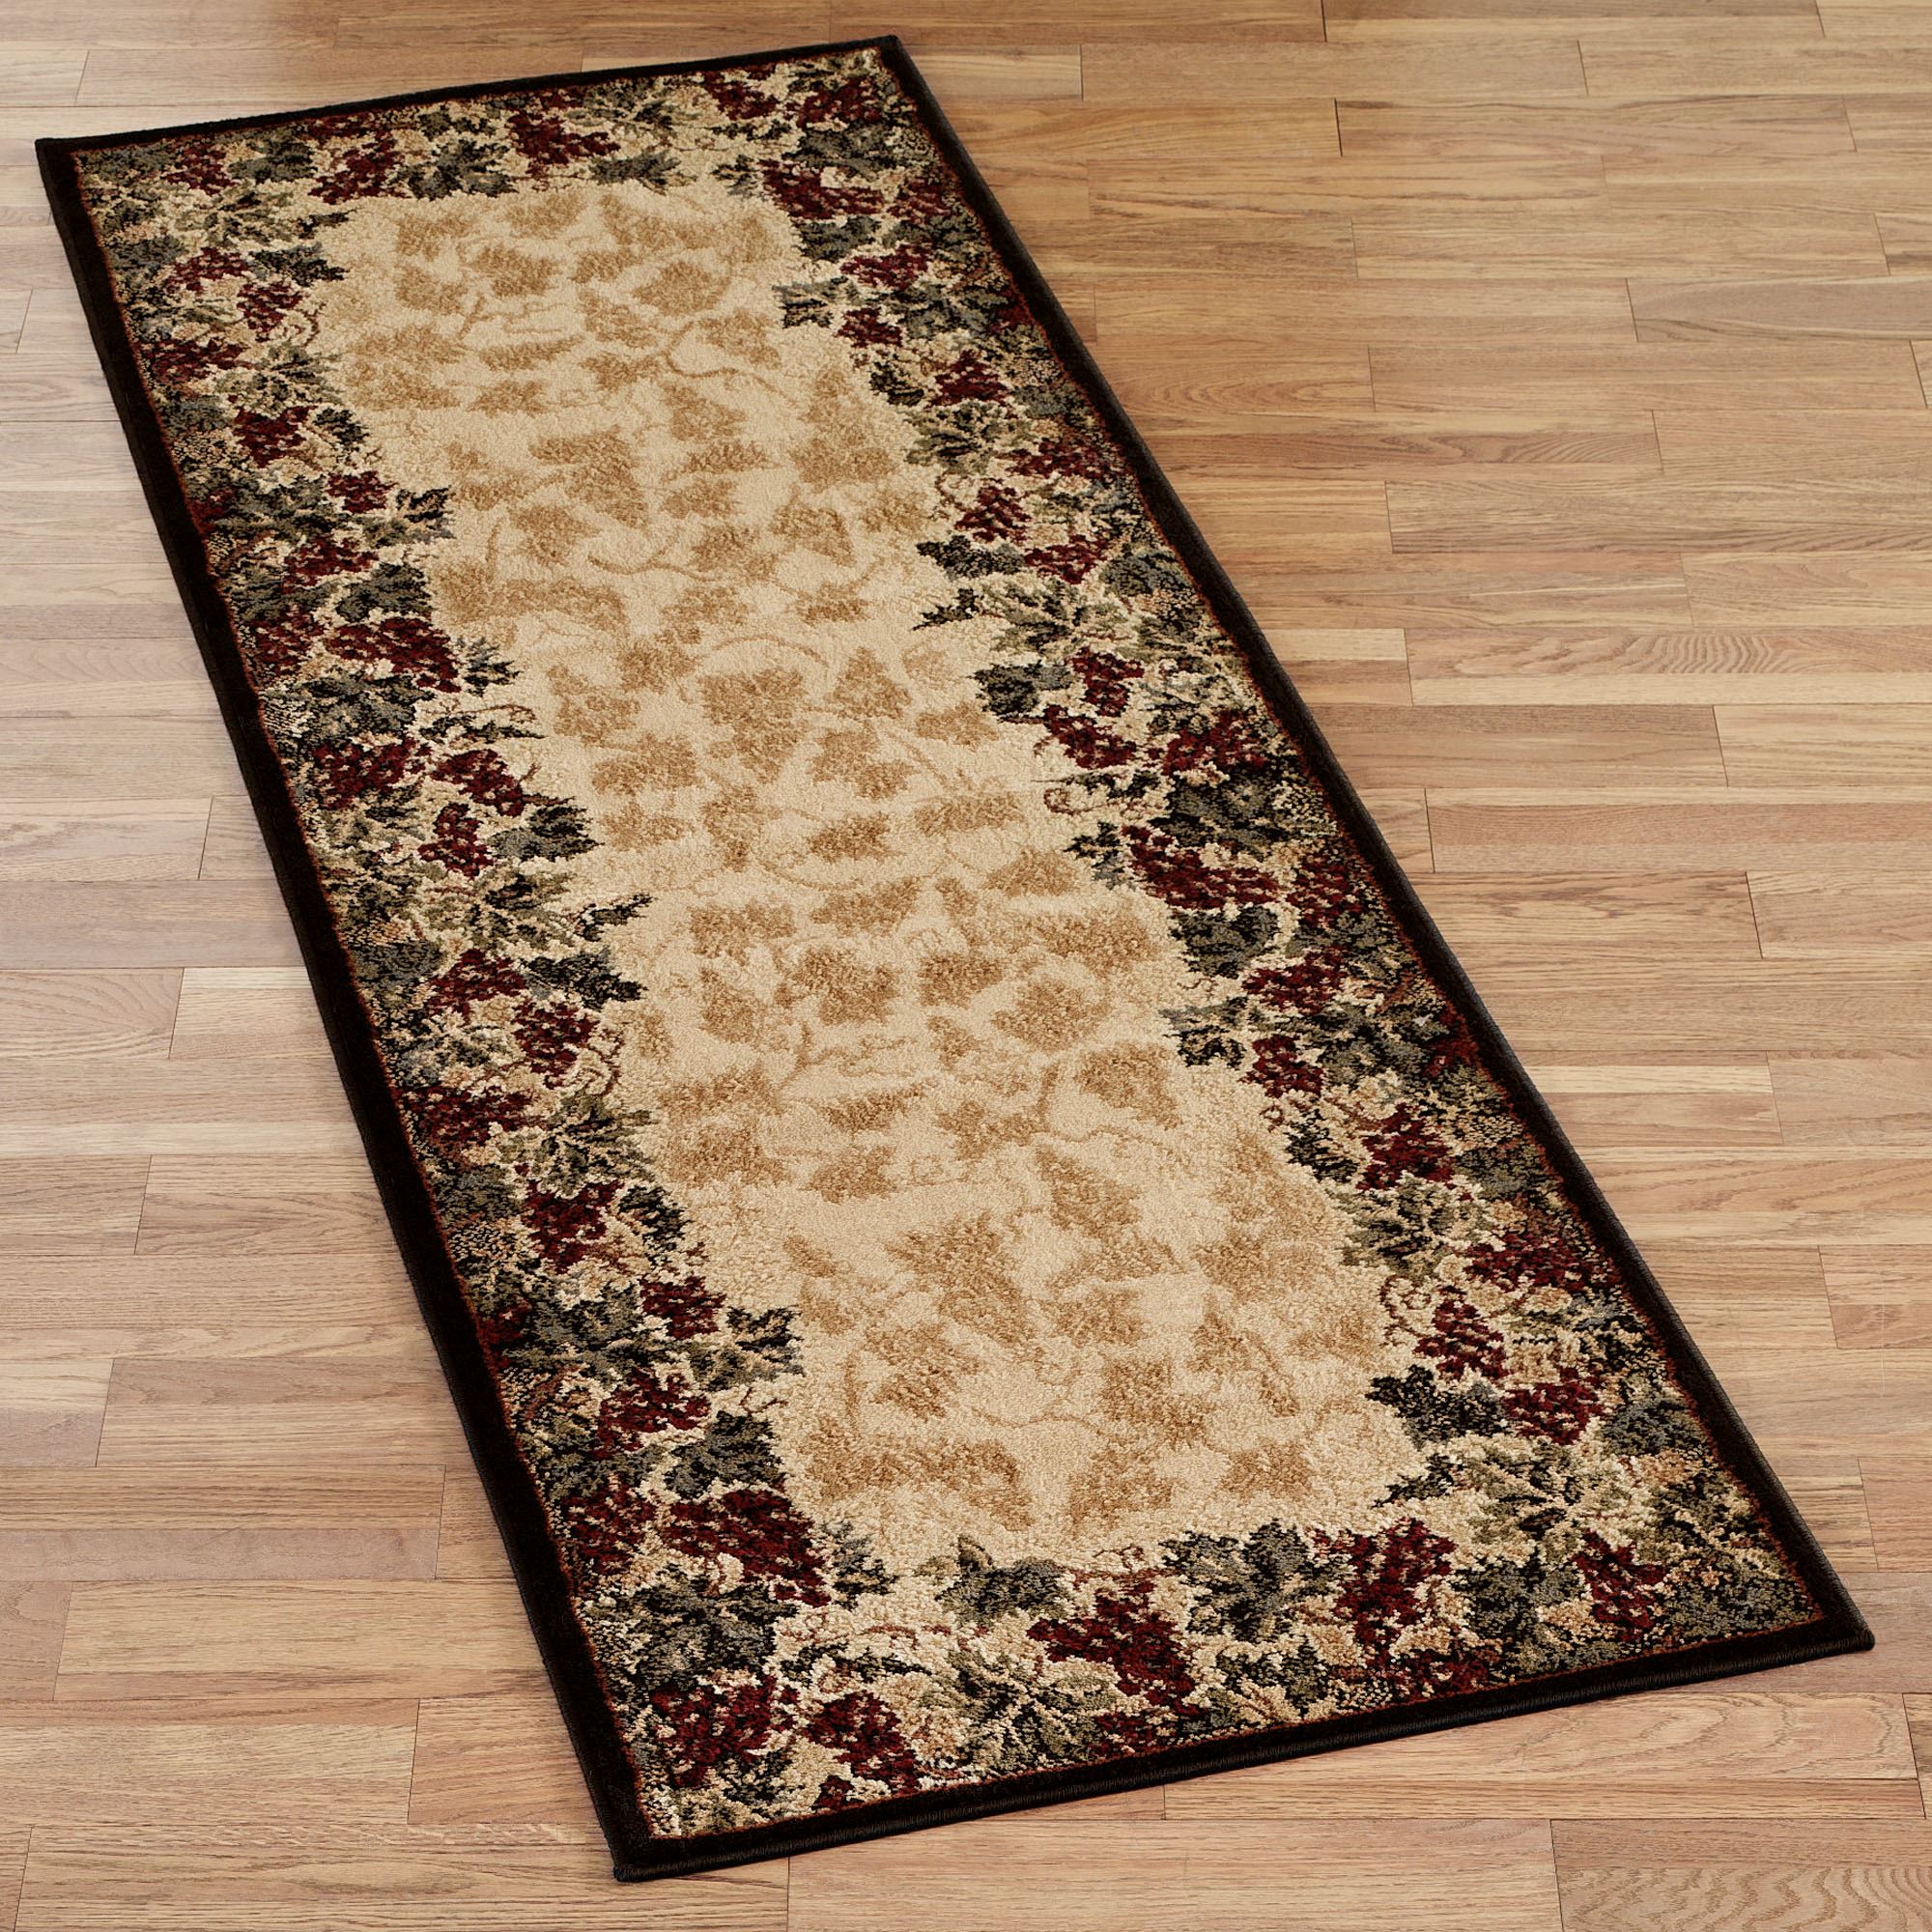 Your go-to guide on buying a runner rug